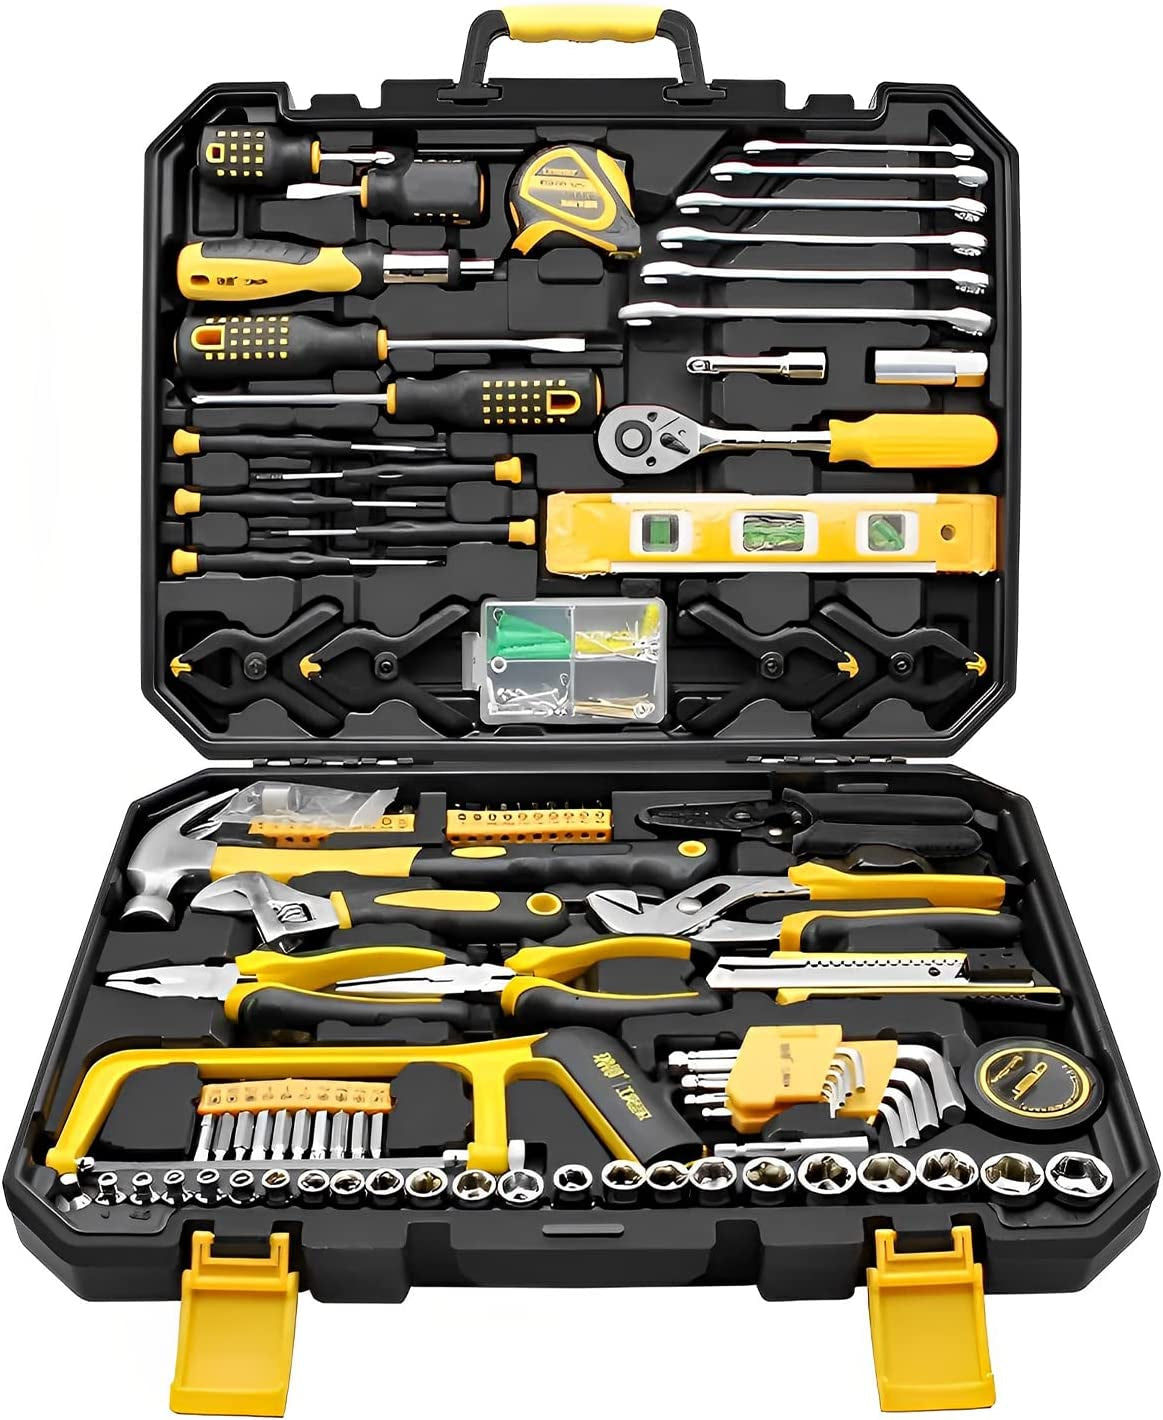 168 Piece Socket Wrench Auto Repair Tool Combination Package Mixed Tool Set Hand Tool Kit with Plastic Toolbox Storage Case